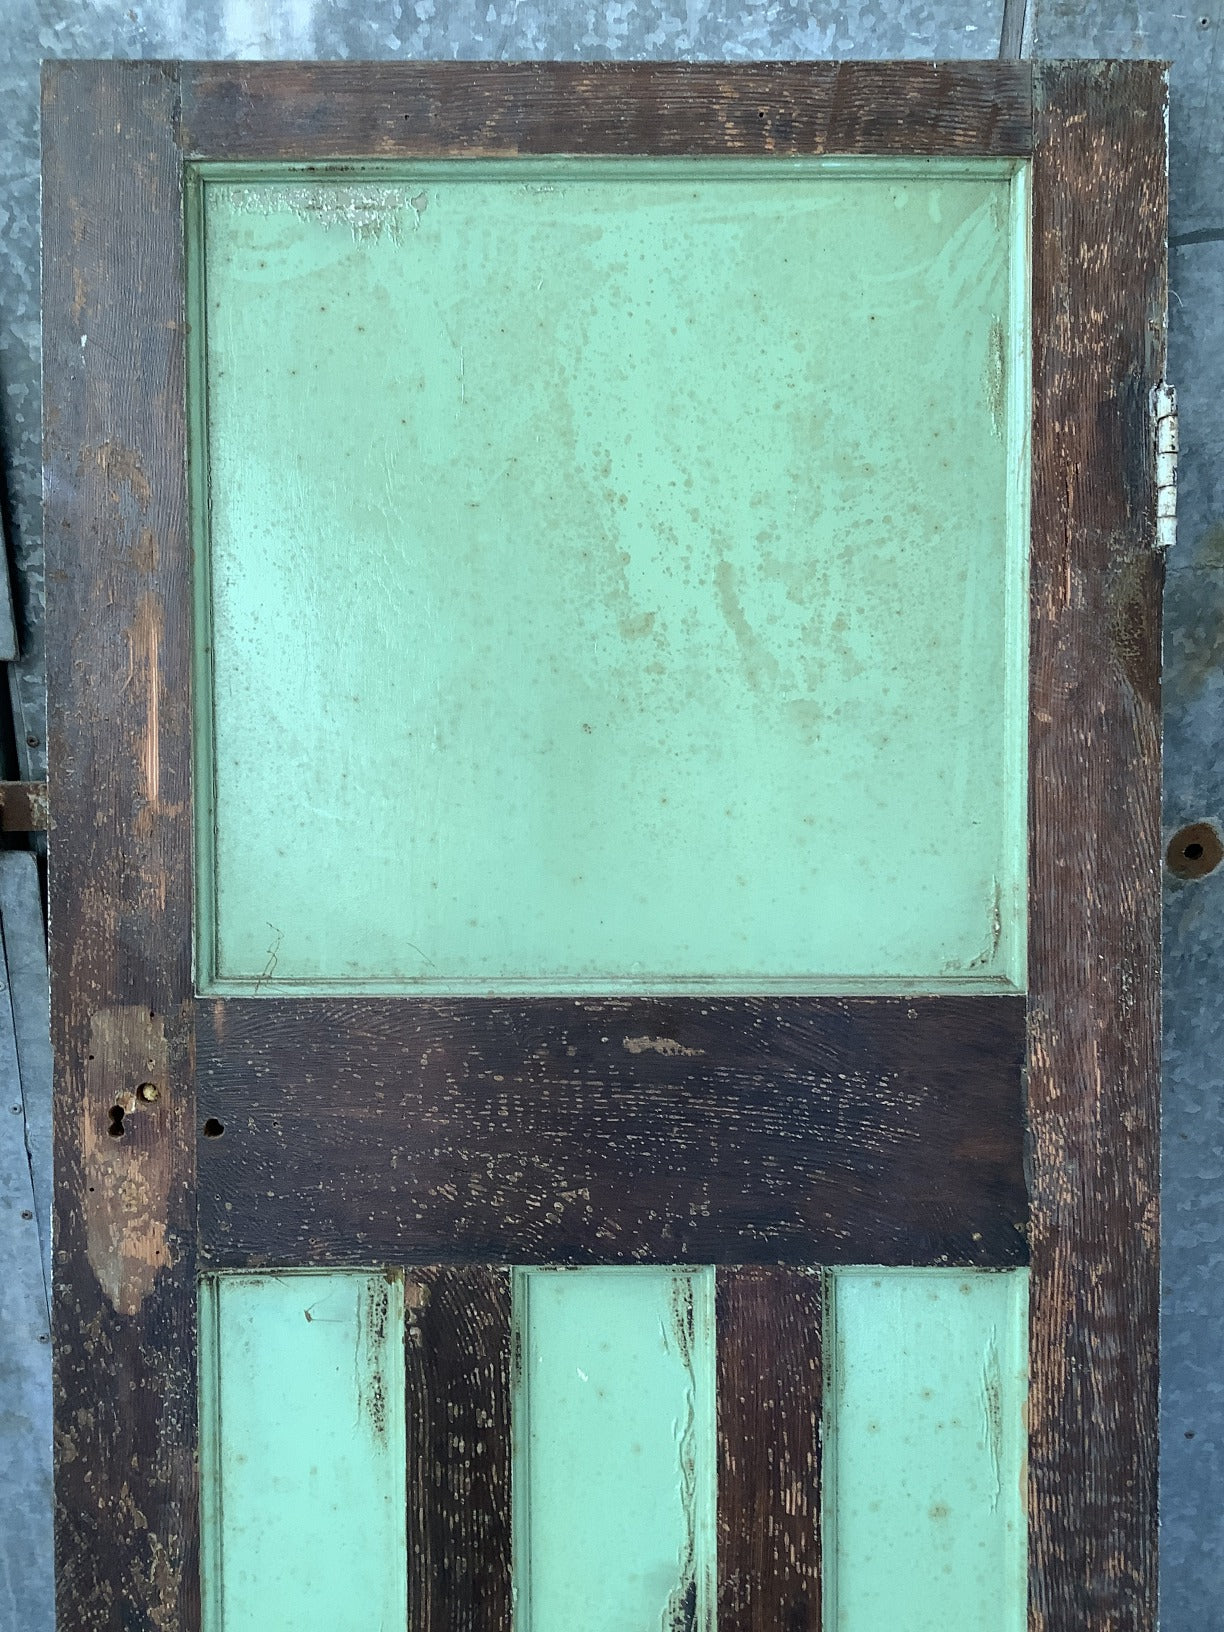 29 1/8"X70 3/4" 1930s Internal Painted Pitch Pine Four Panel Door 1 over 3 Old